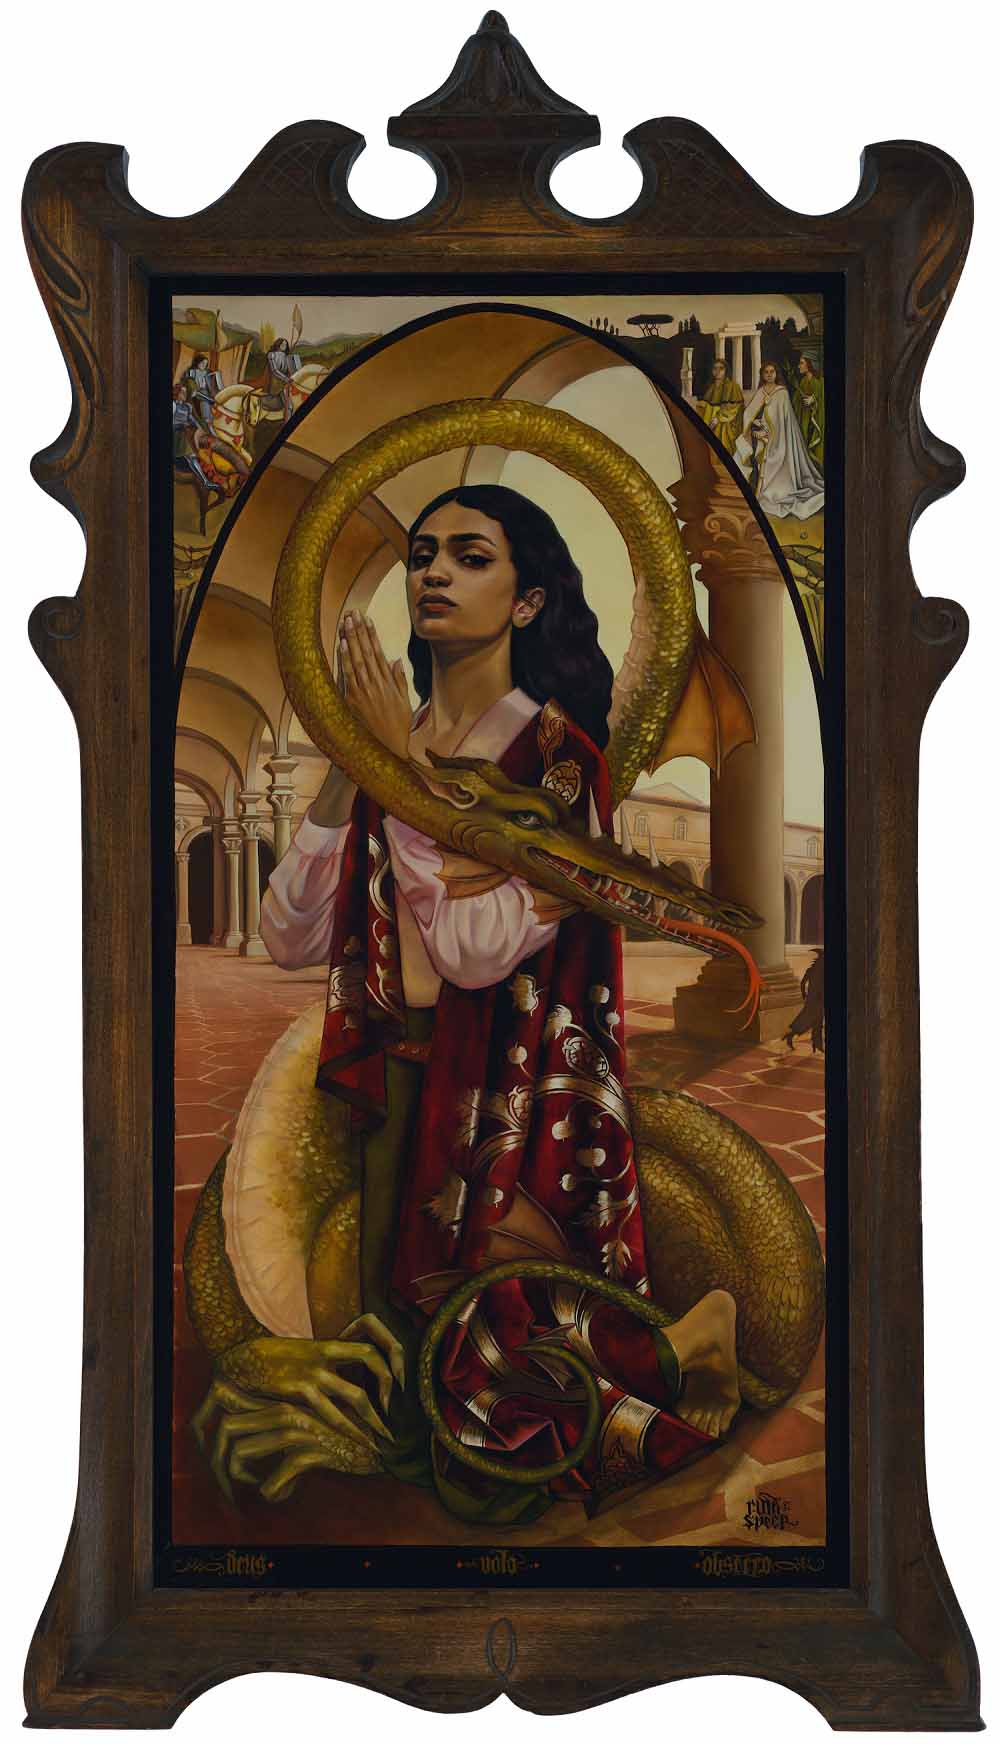 Ruth Speer
St. George and the Dragon, 2021 
